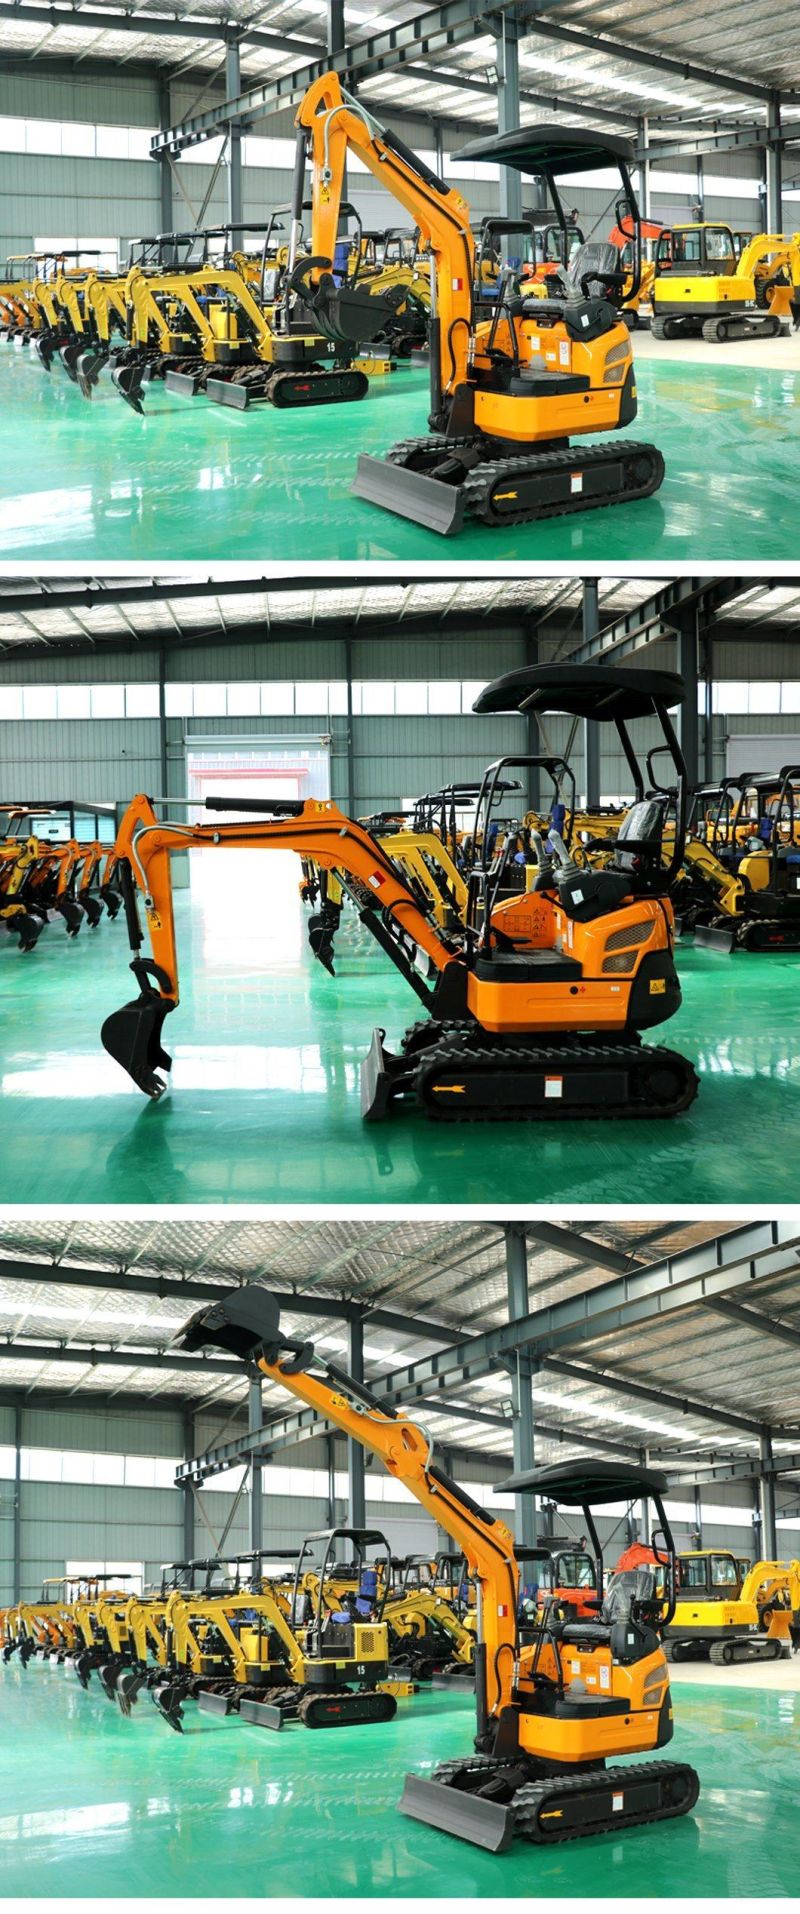 Zero Tail Hydraulic Mini Excavator 2 Tons 2000kg CE Approval Meet Euro V/EPA Emission Bagger Excavator with Various Attachments